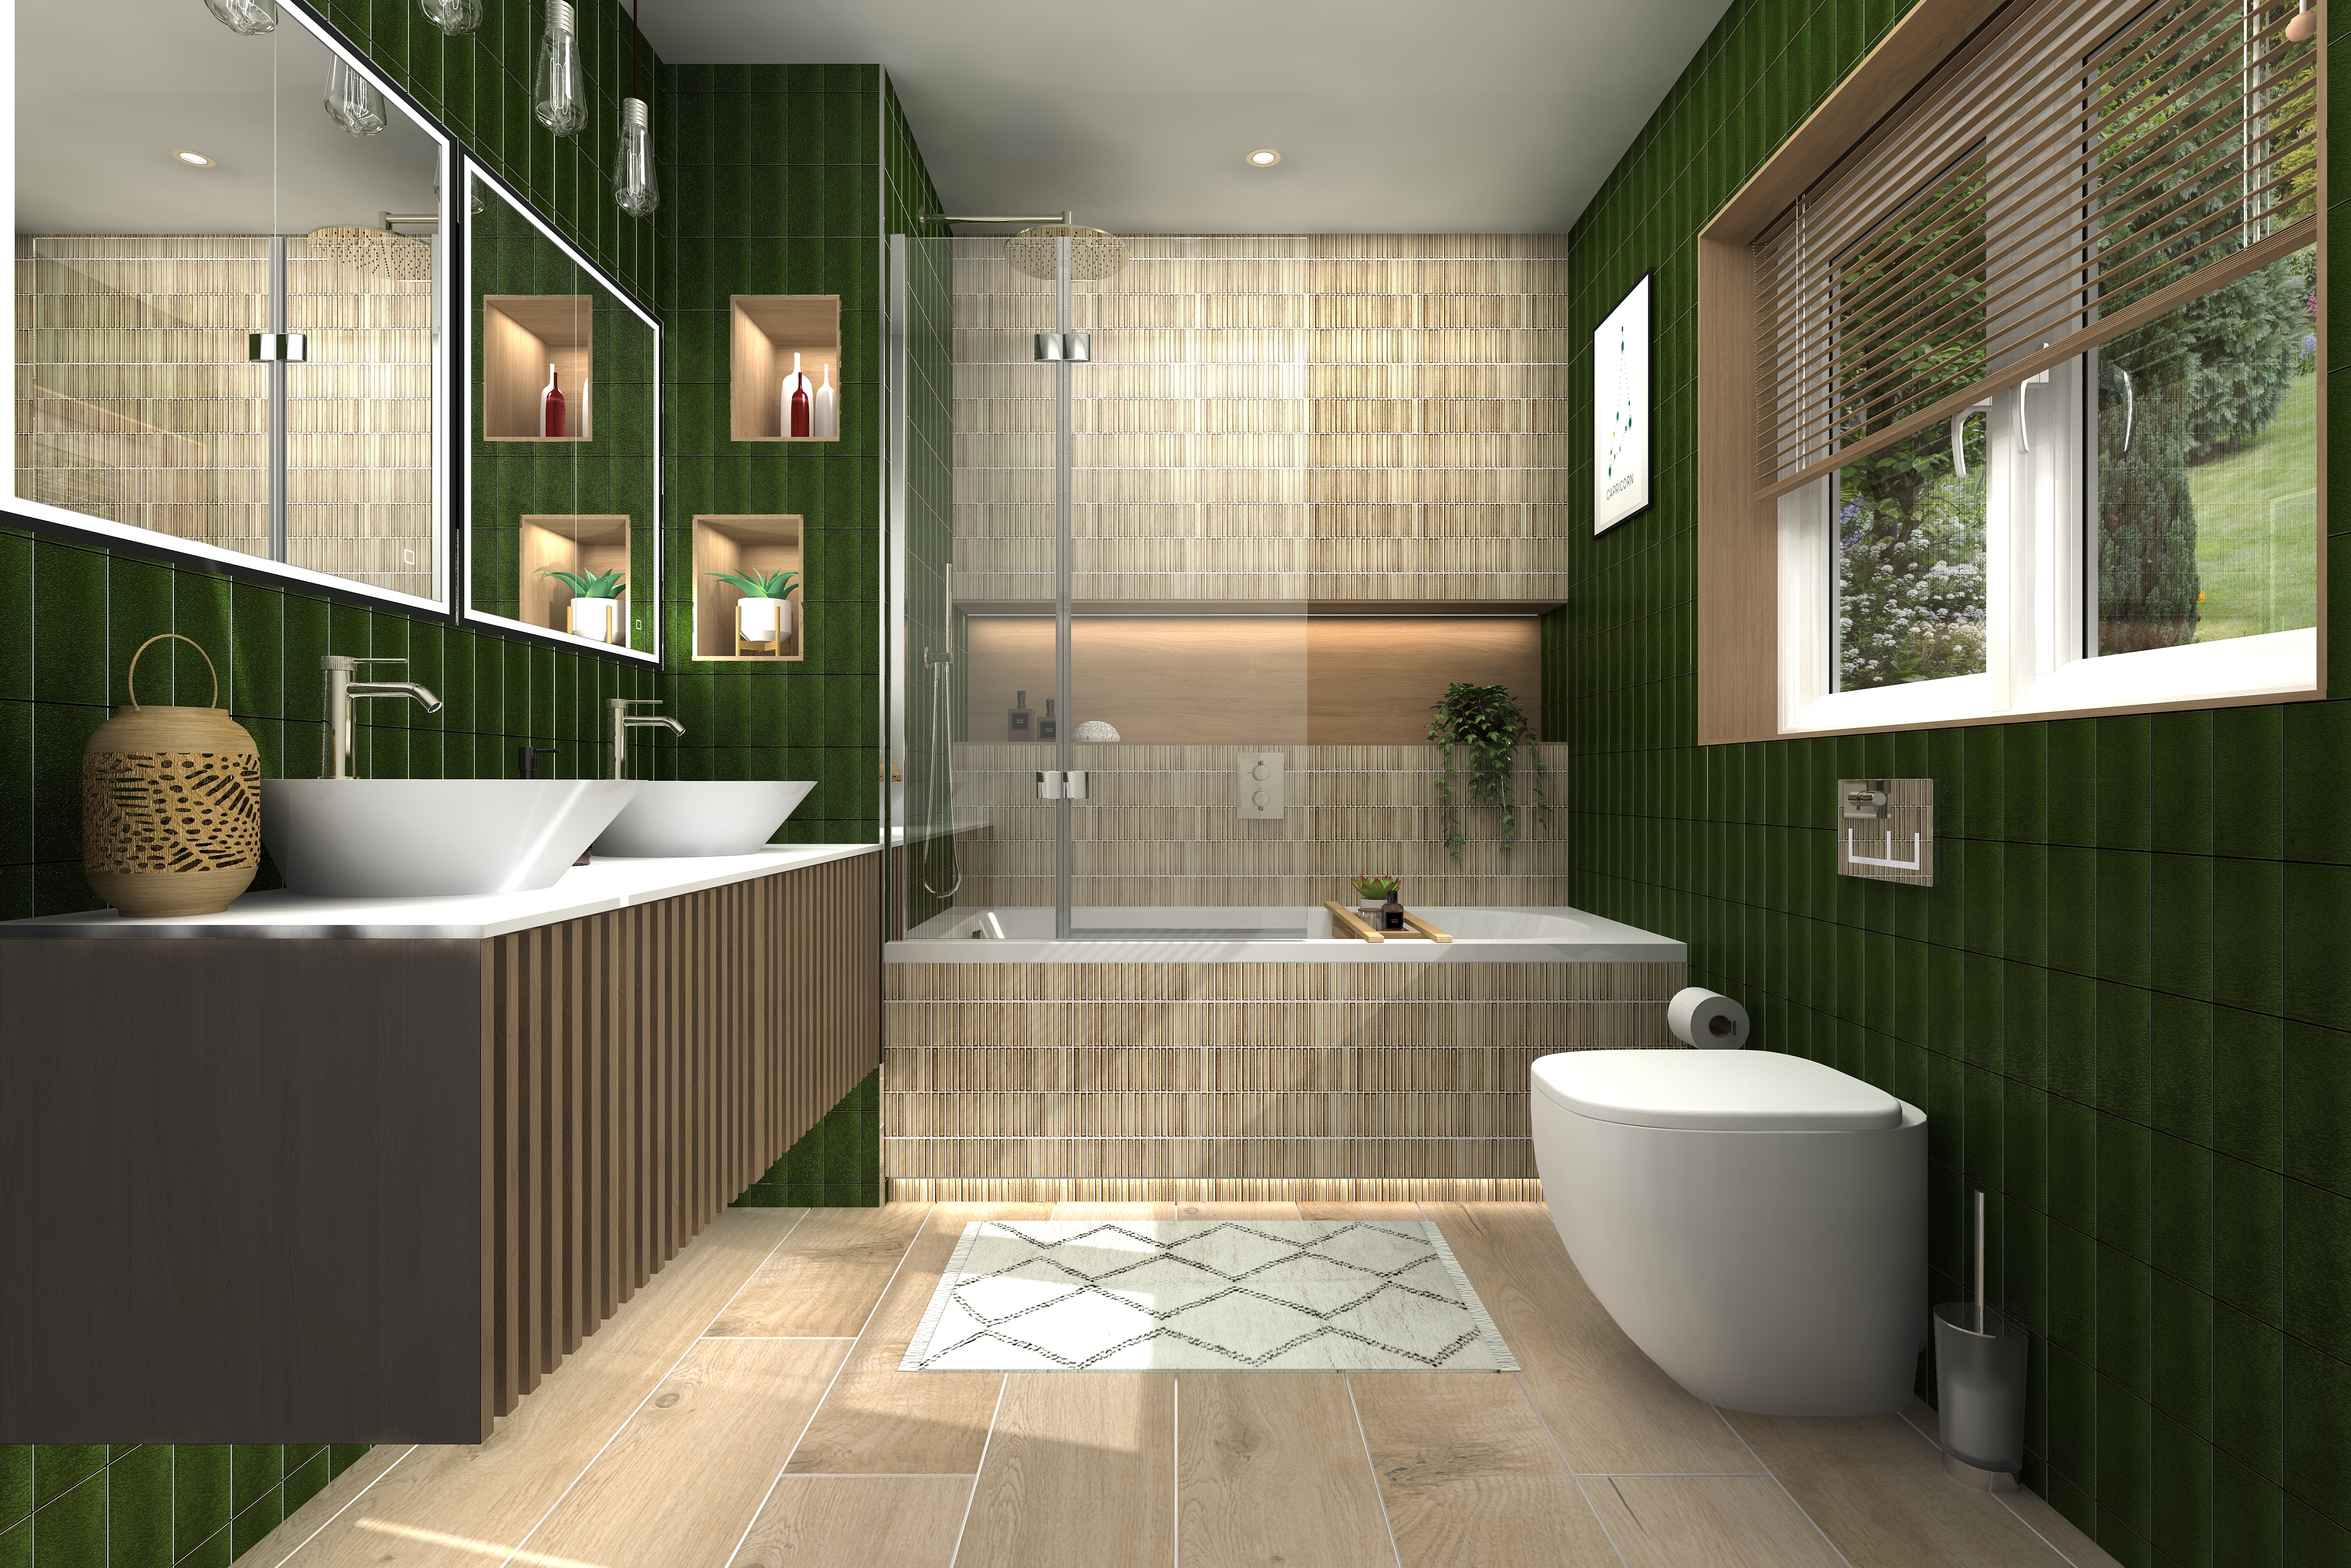 Digital lifestyle image of the Capricorn inspired bathroom, with wooden flooring and cream bath mat, emerald green wall tiles, bamboo effect tiles in the bathing area, shower bath with folding bath screen, wall mounted handset shower and rainfall showerhead, back to wall toilet, slotted wooden wall hung vanity unit, twin countertop basins and twin recessed LED mirror cabinets